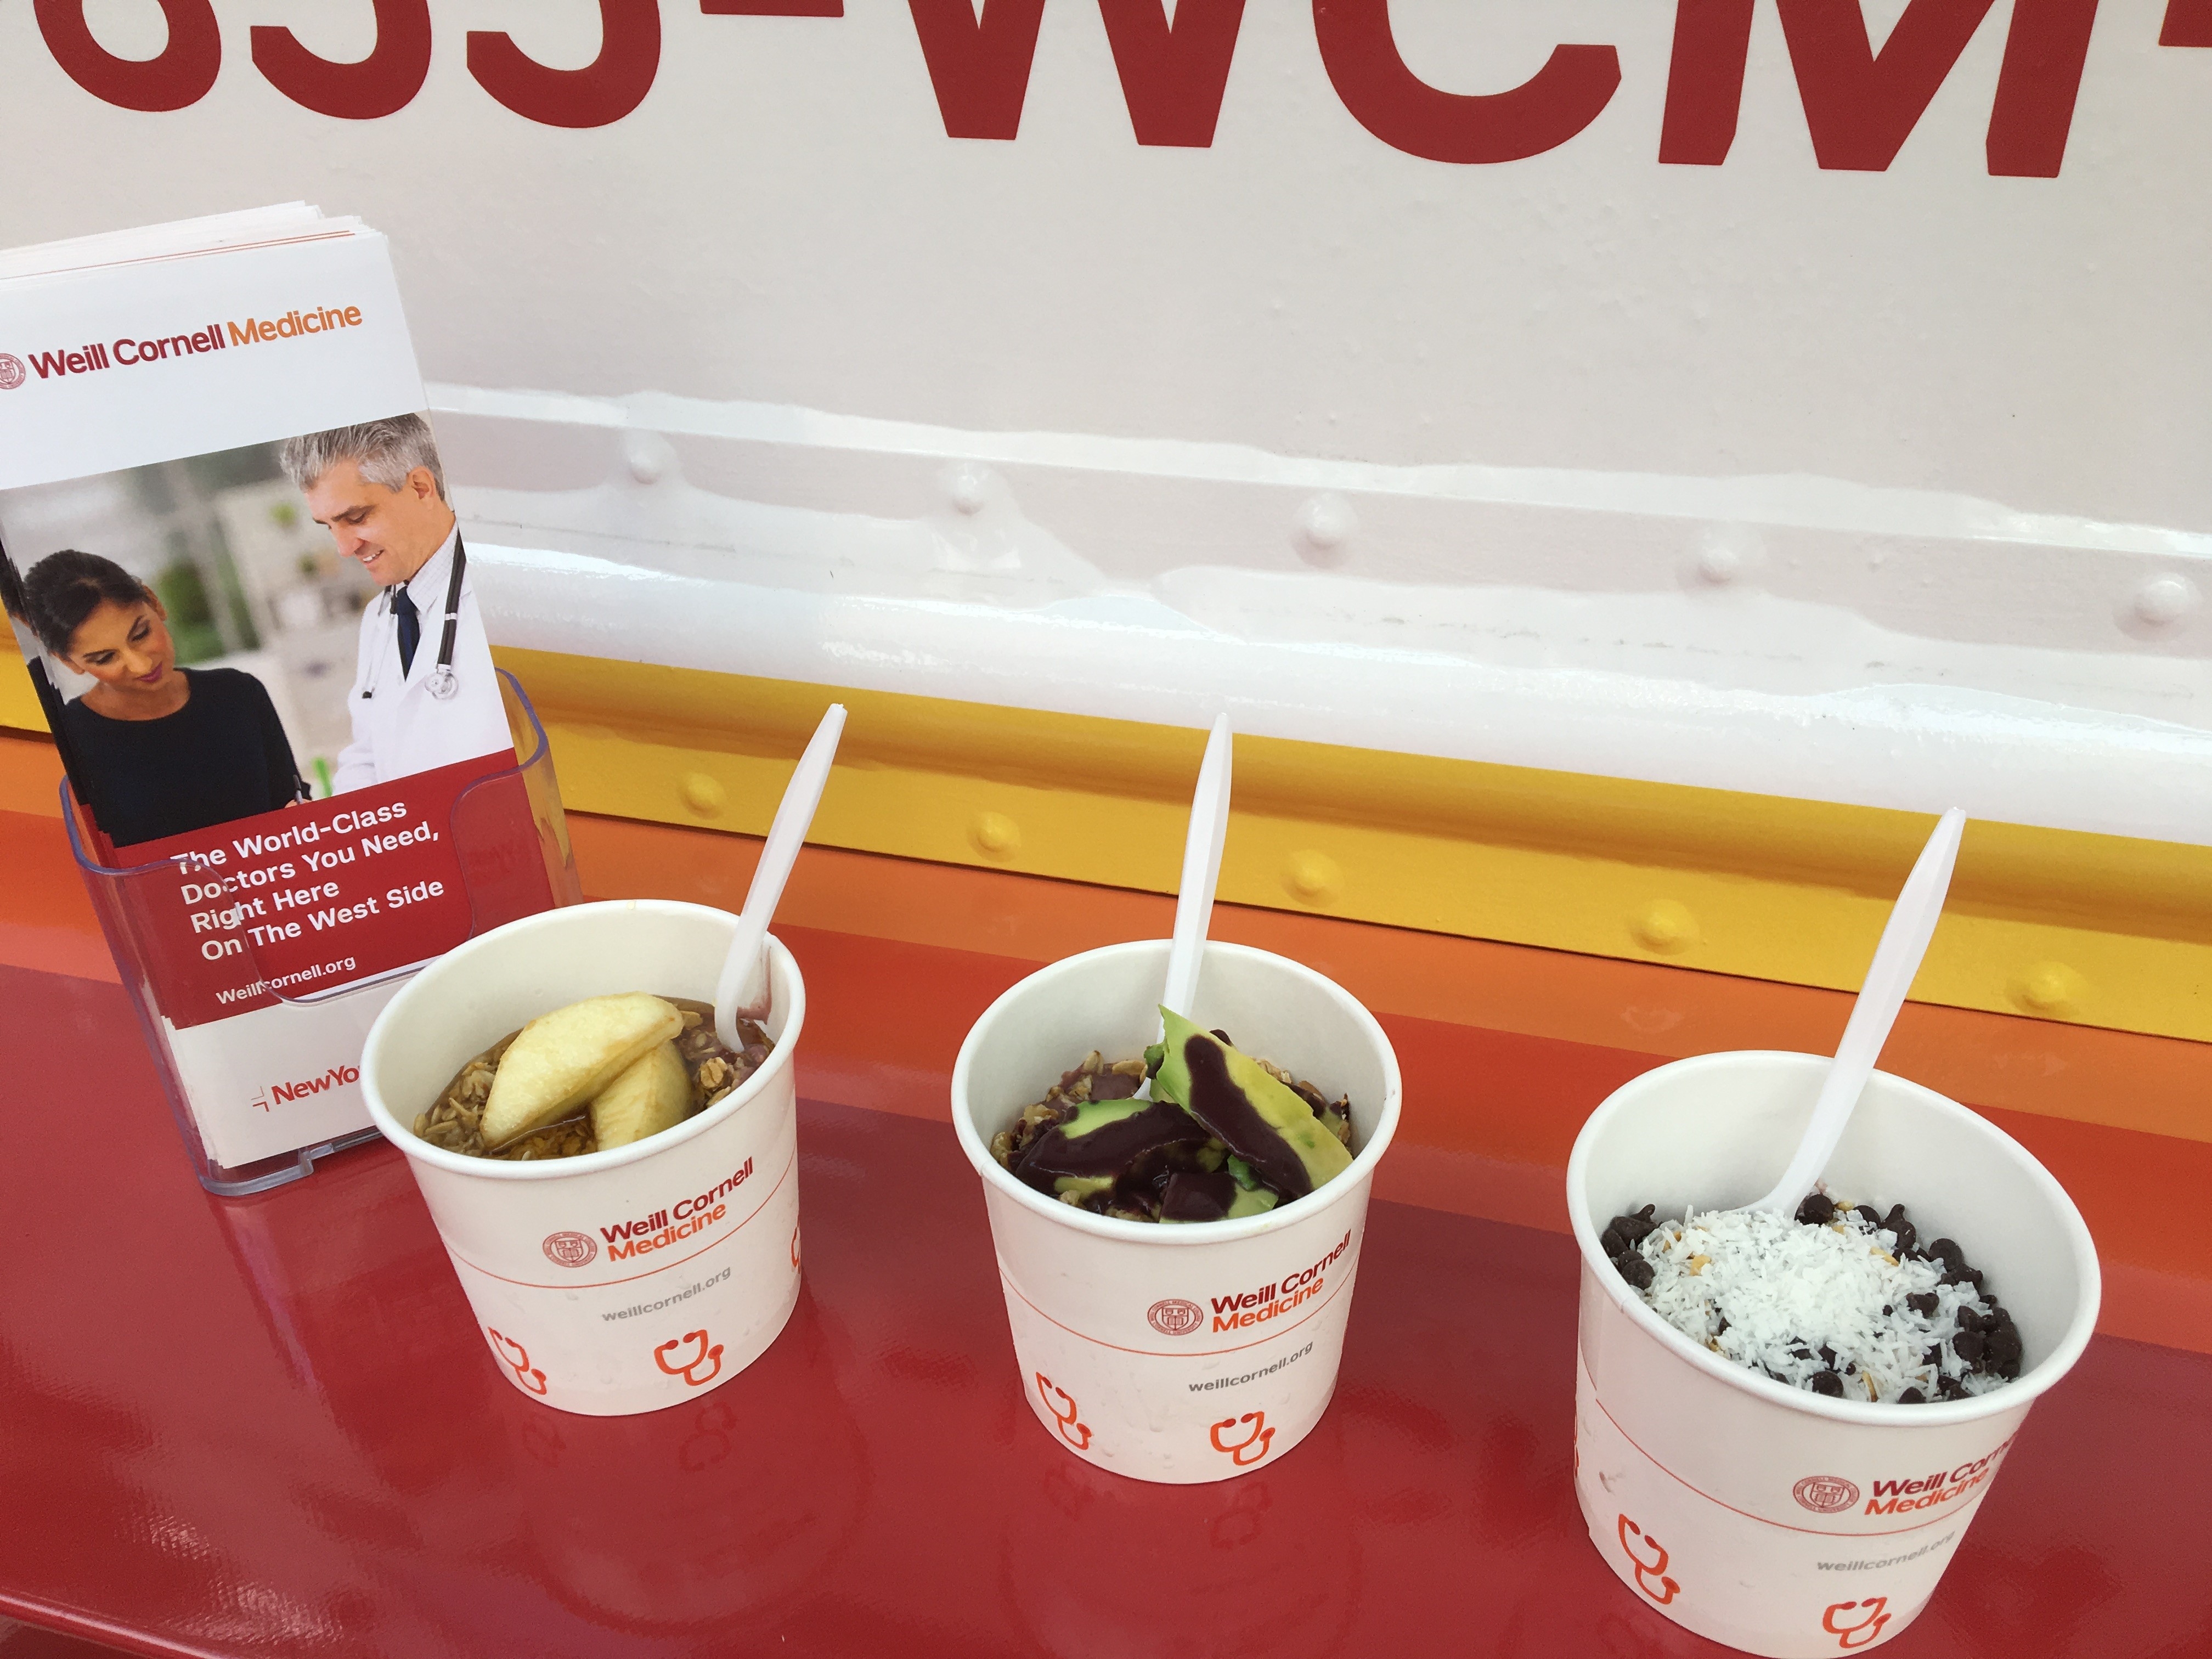 Weill Cornell Medicine offered acai bowls during the Columbus Avenue Festival on Sunday, Sept. 17, 2017.